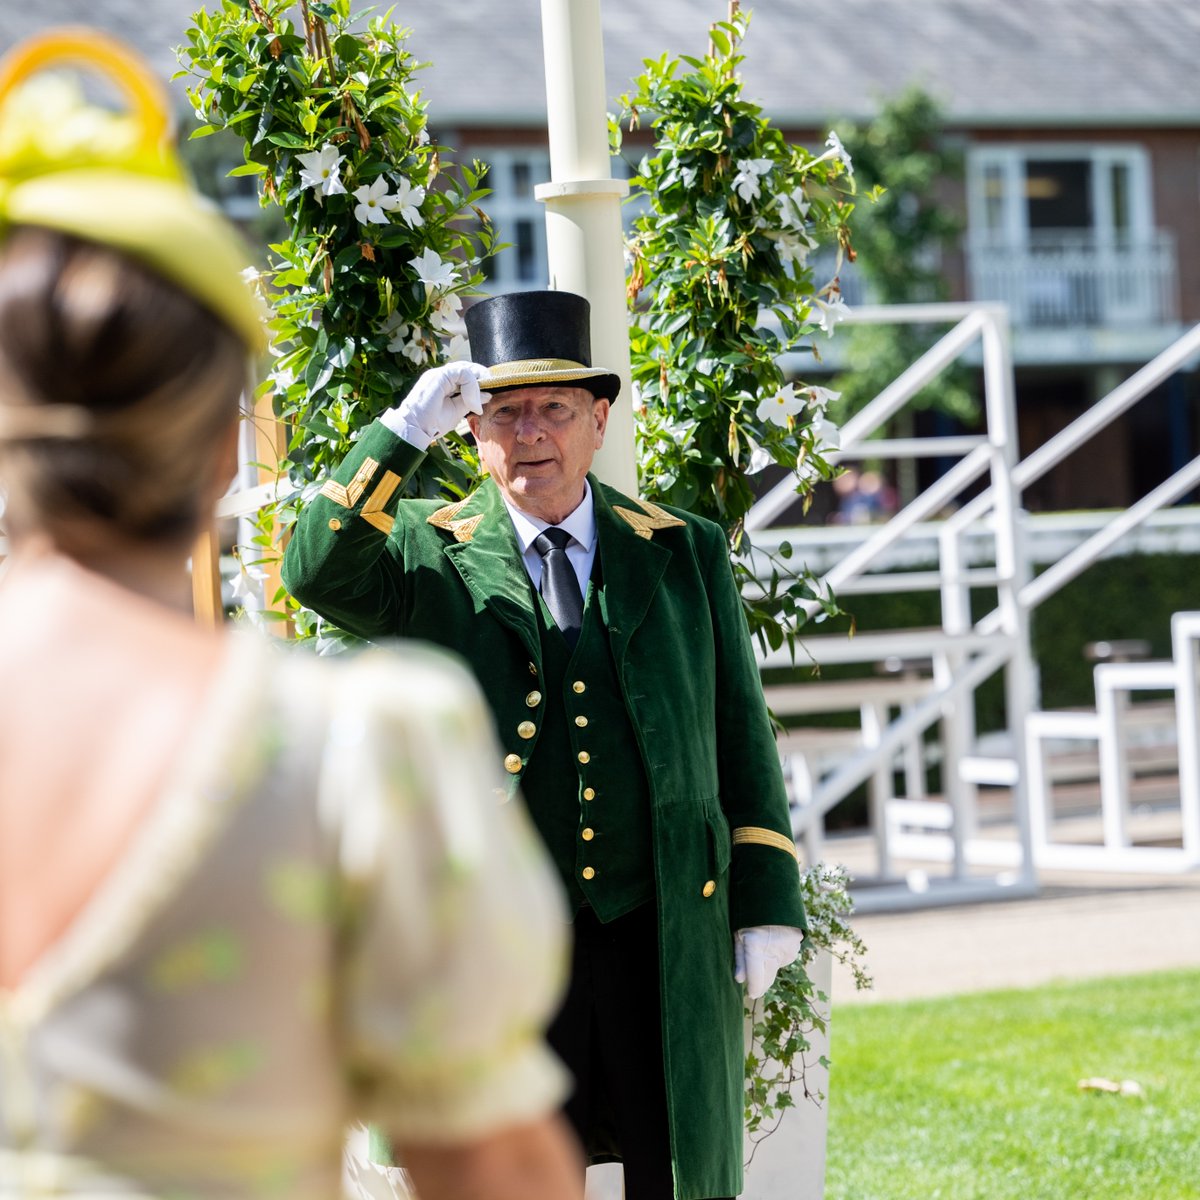 On the anniversary of His Majesty The King’s Coronation, please take a moment to admire His Majesty’s cypher which now features on the brilliant gold buttons of the Greencoats’ uniforms at #RoyalAscot.